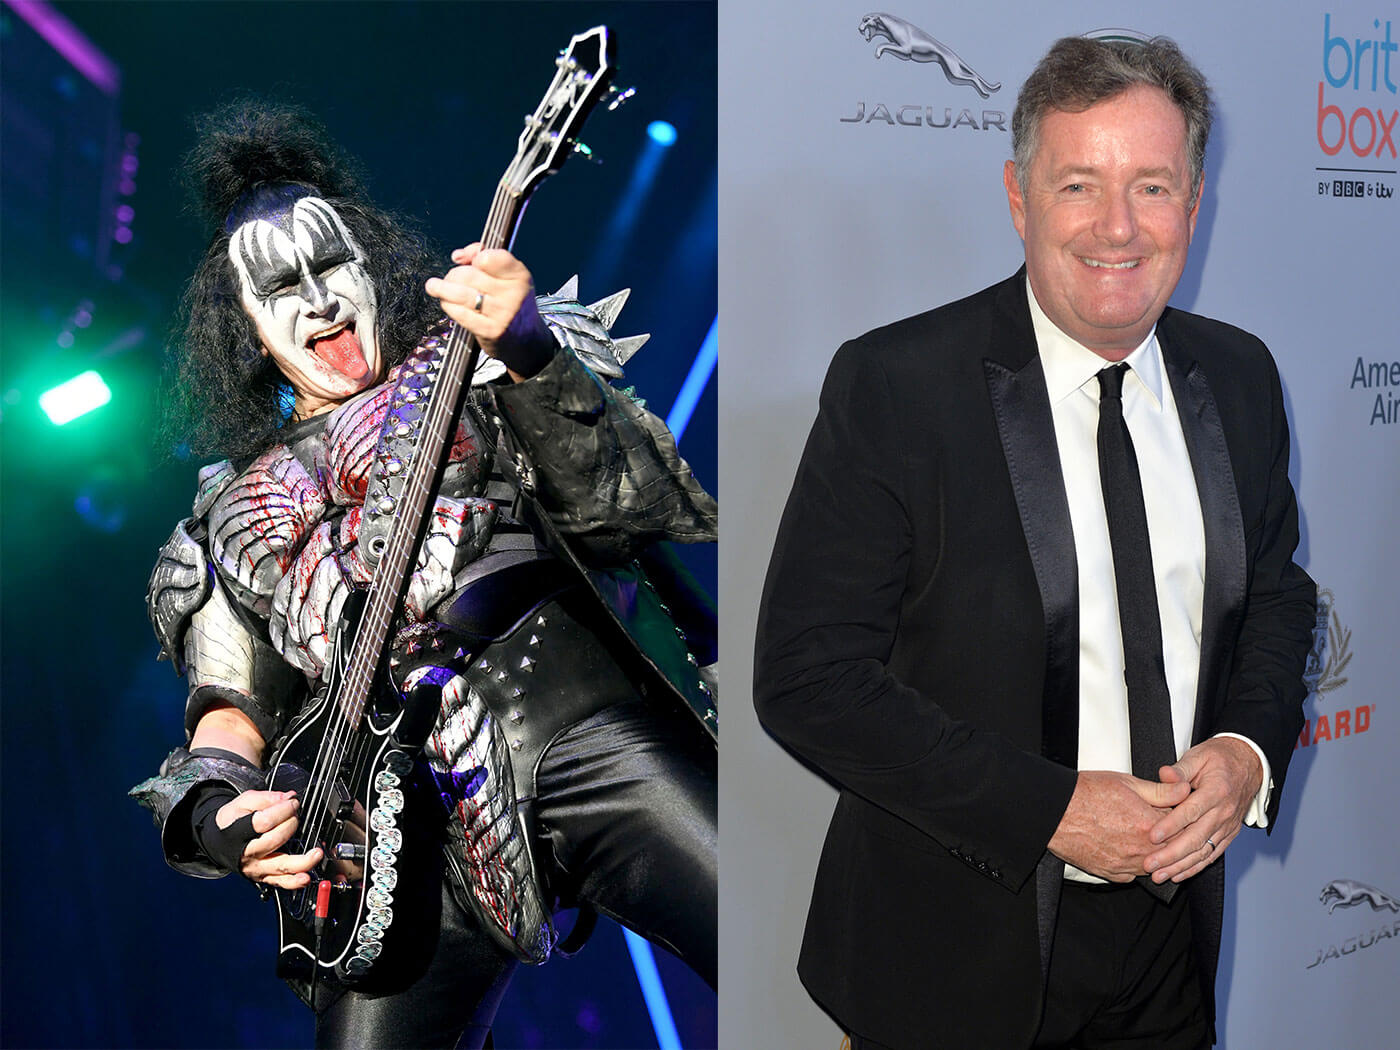 Gene Simmons (left) and Piers Morgan